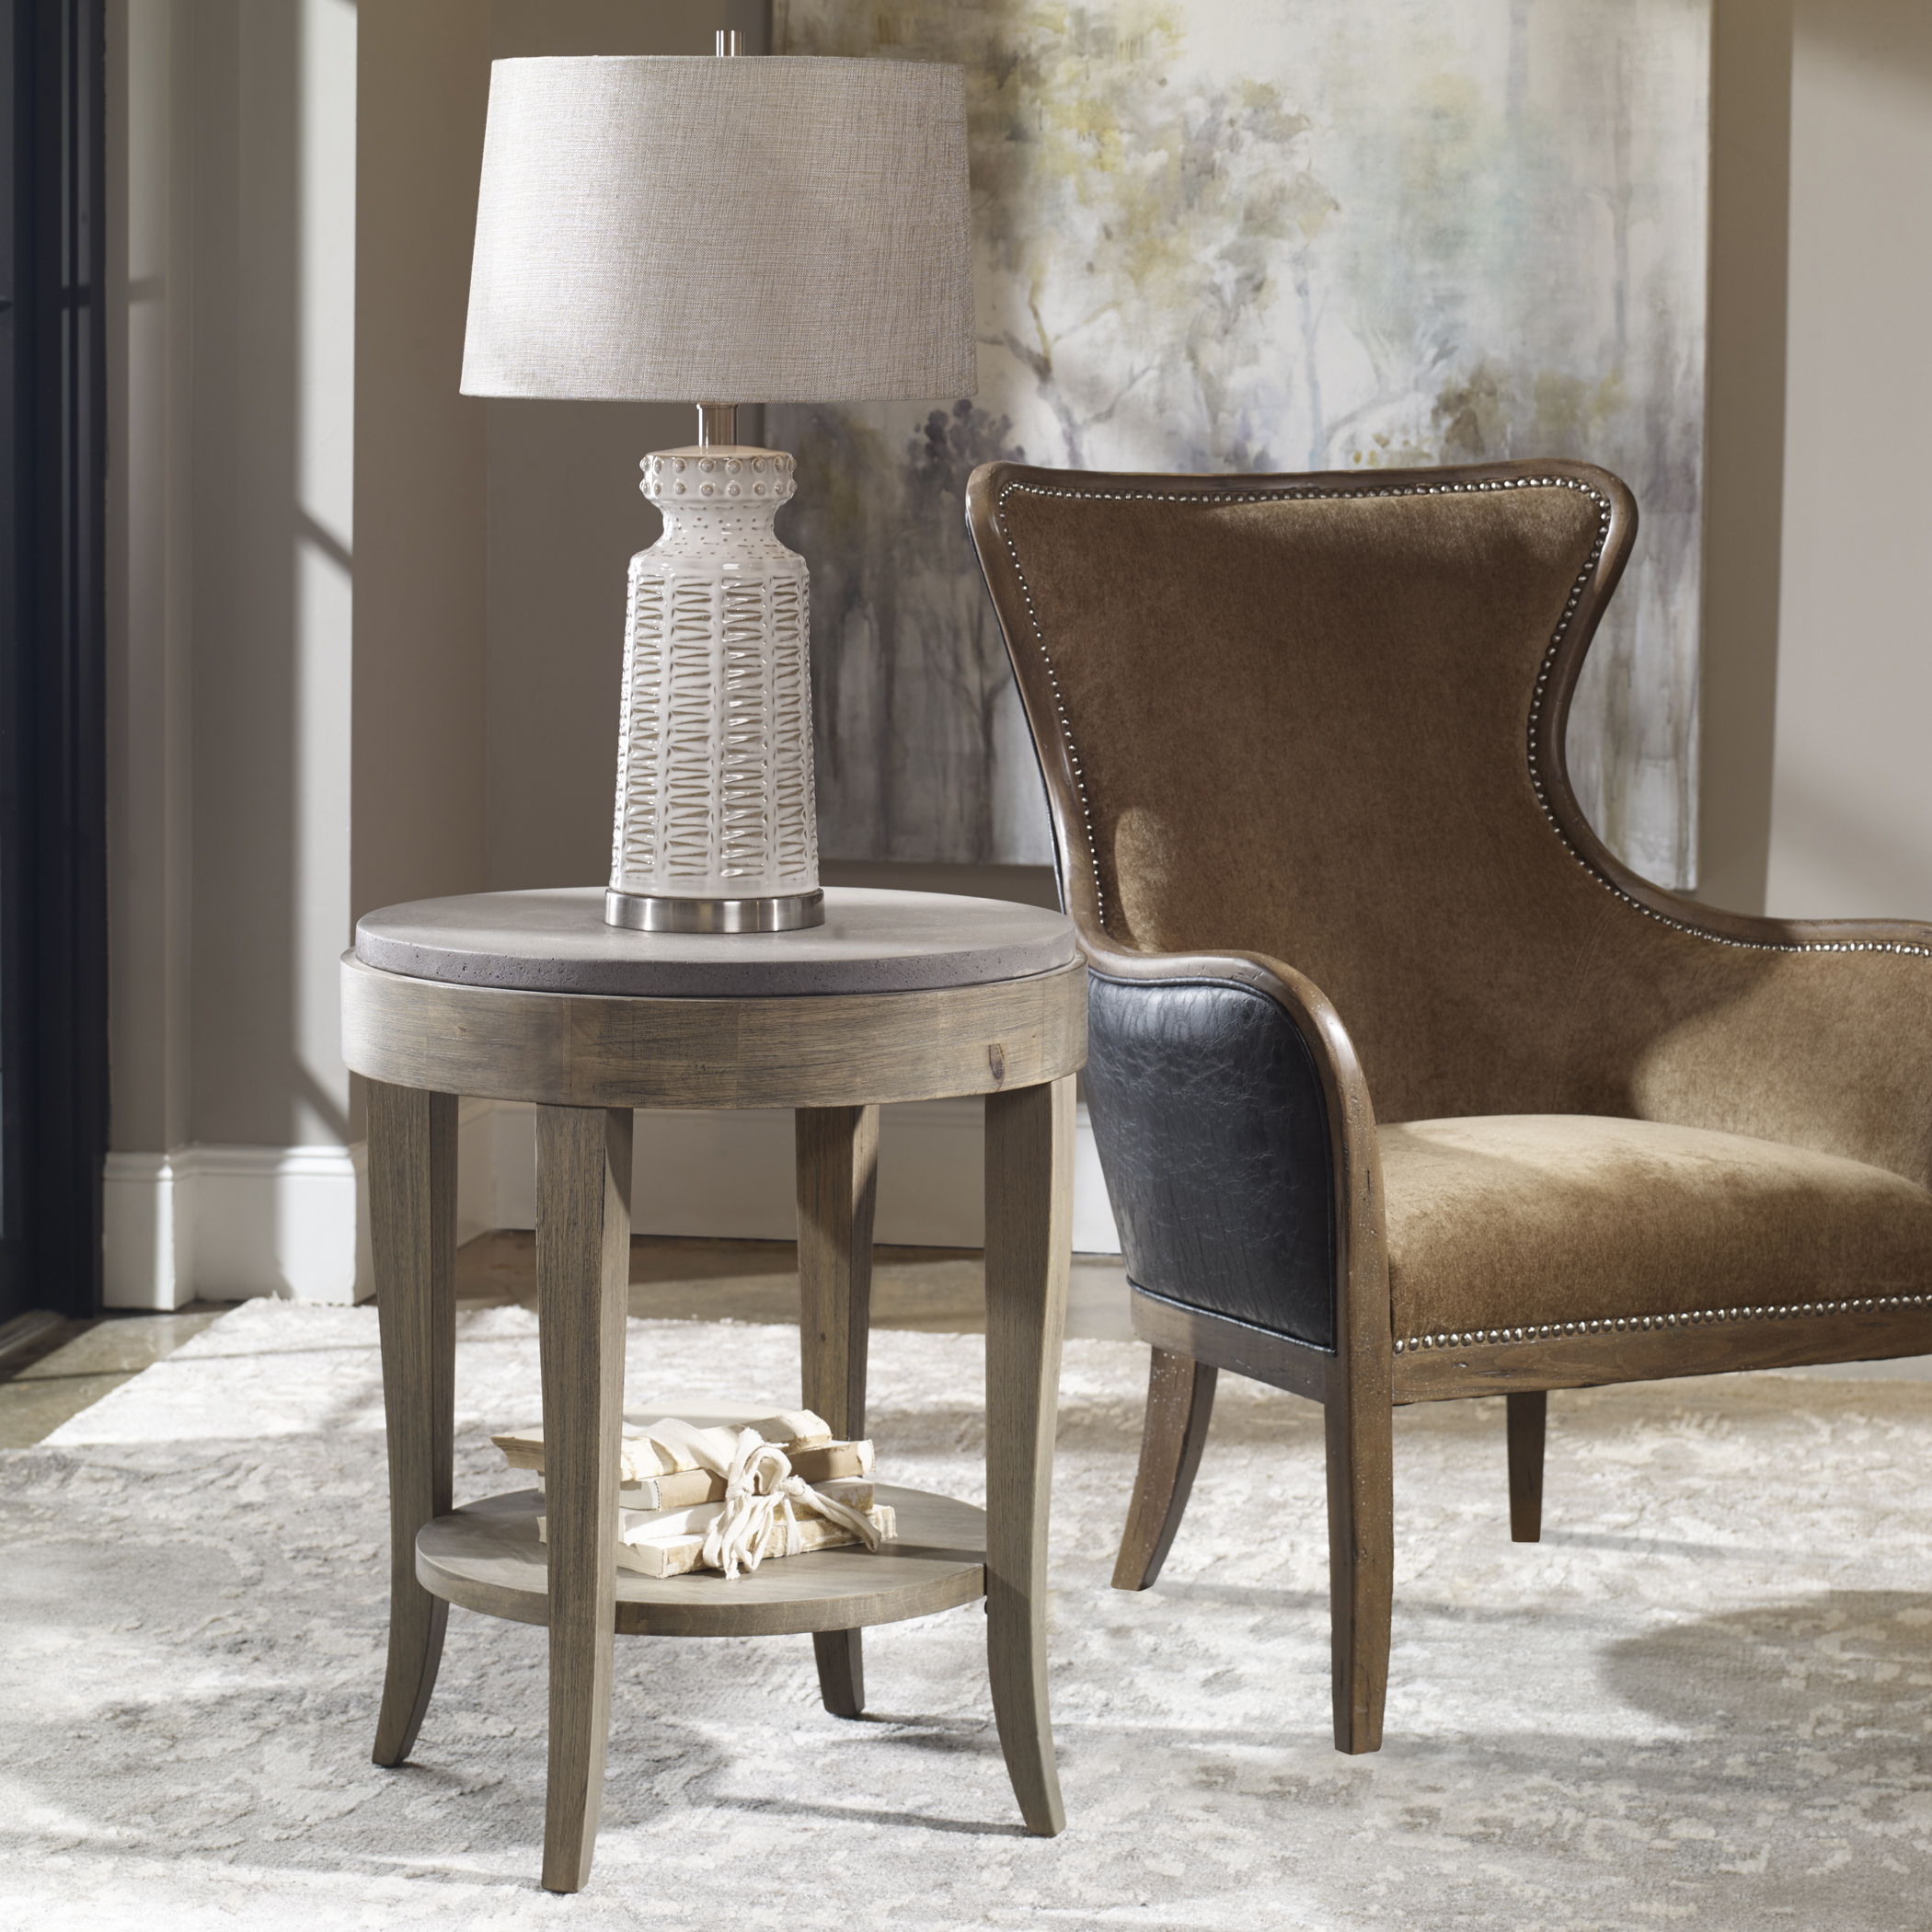 Deka - Round Side Table - Gray & Light Brown